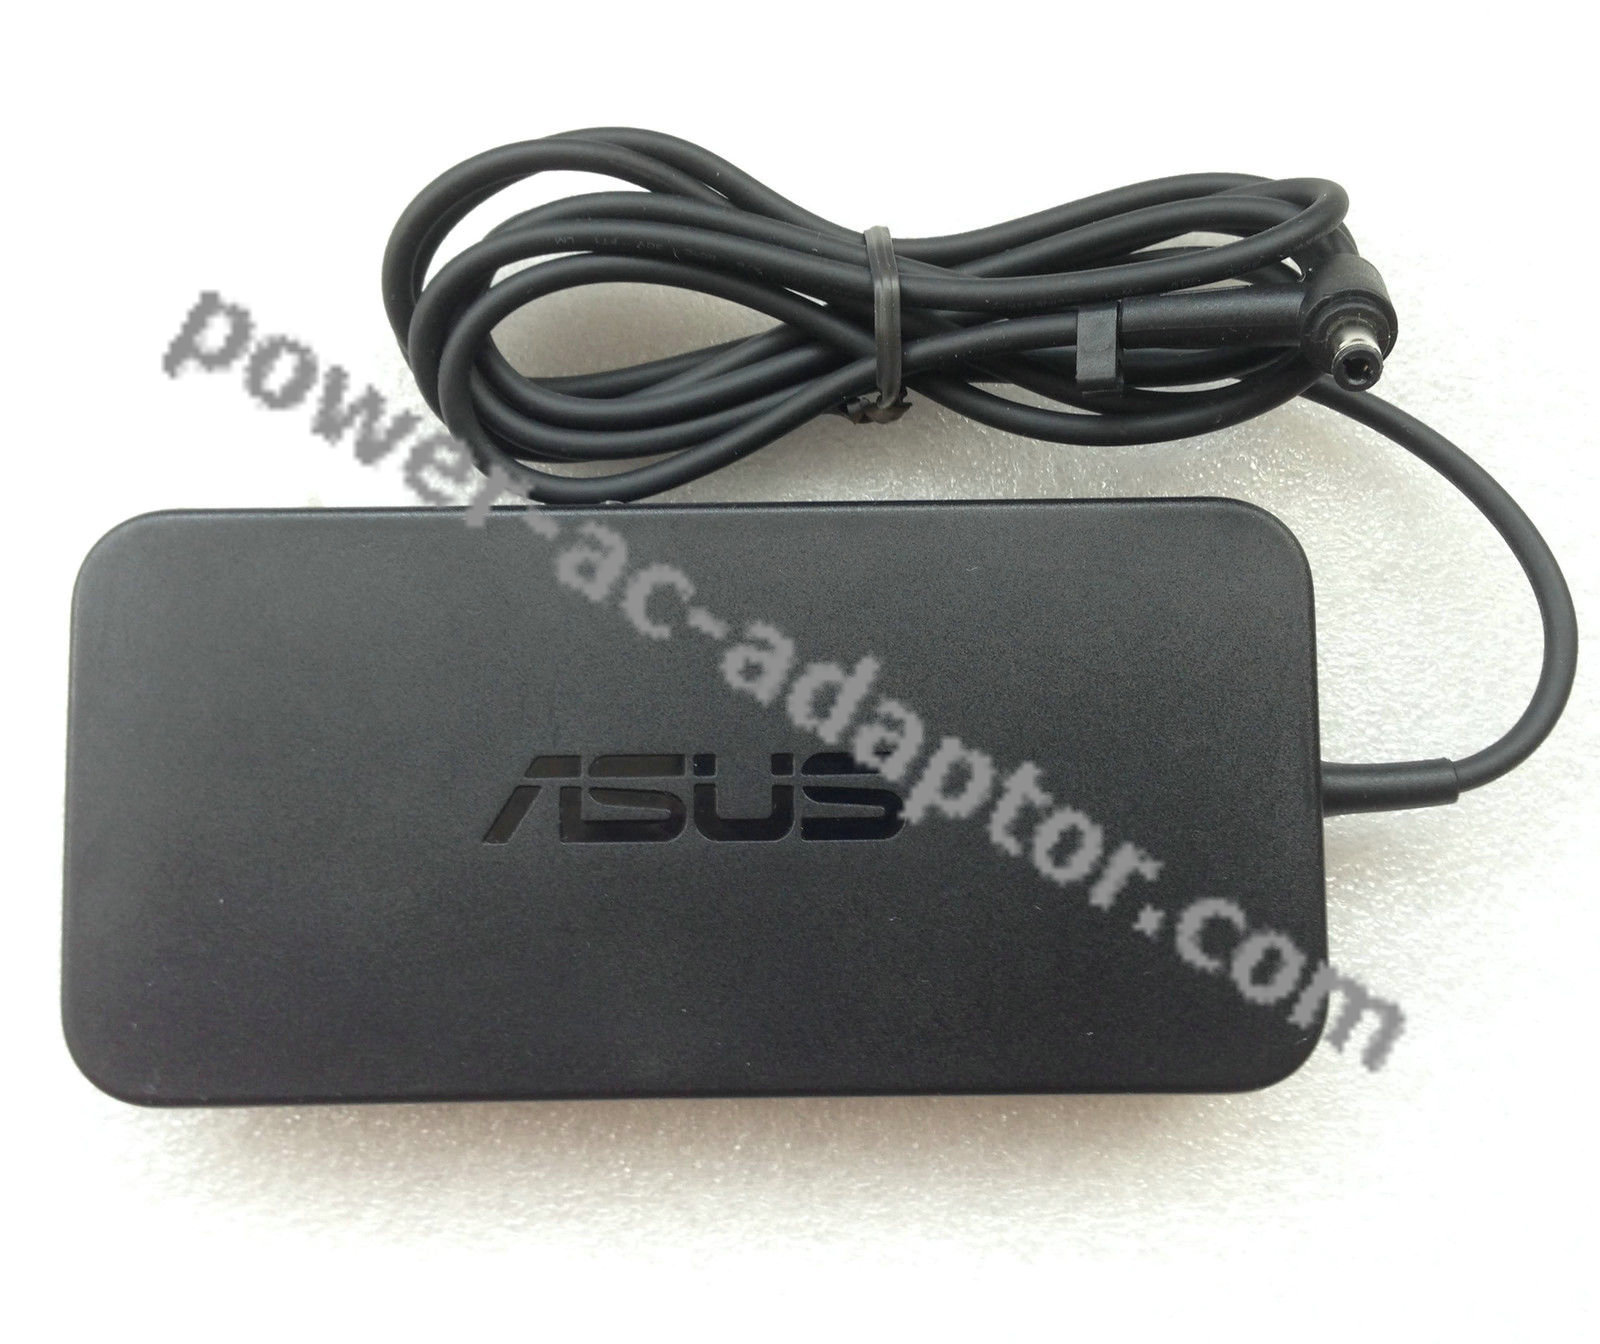 Asus ROG Strix GL553VD-DS71 19V 6.3A 120W AC Adapter Charger